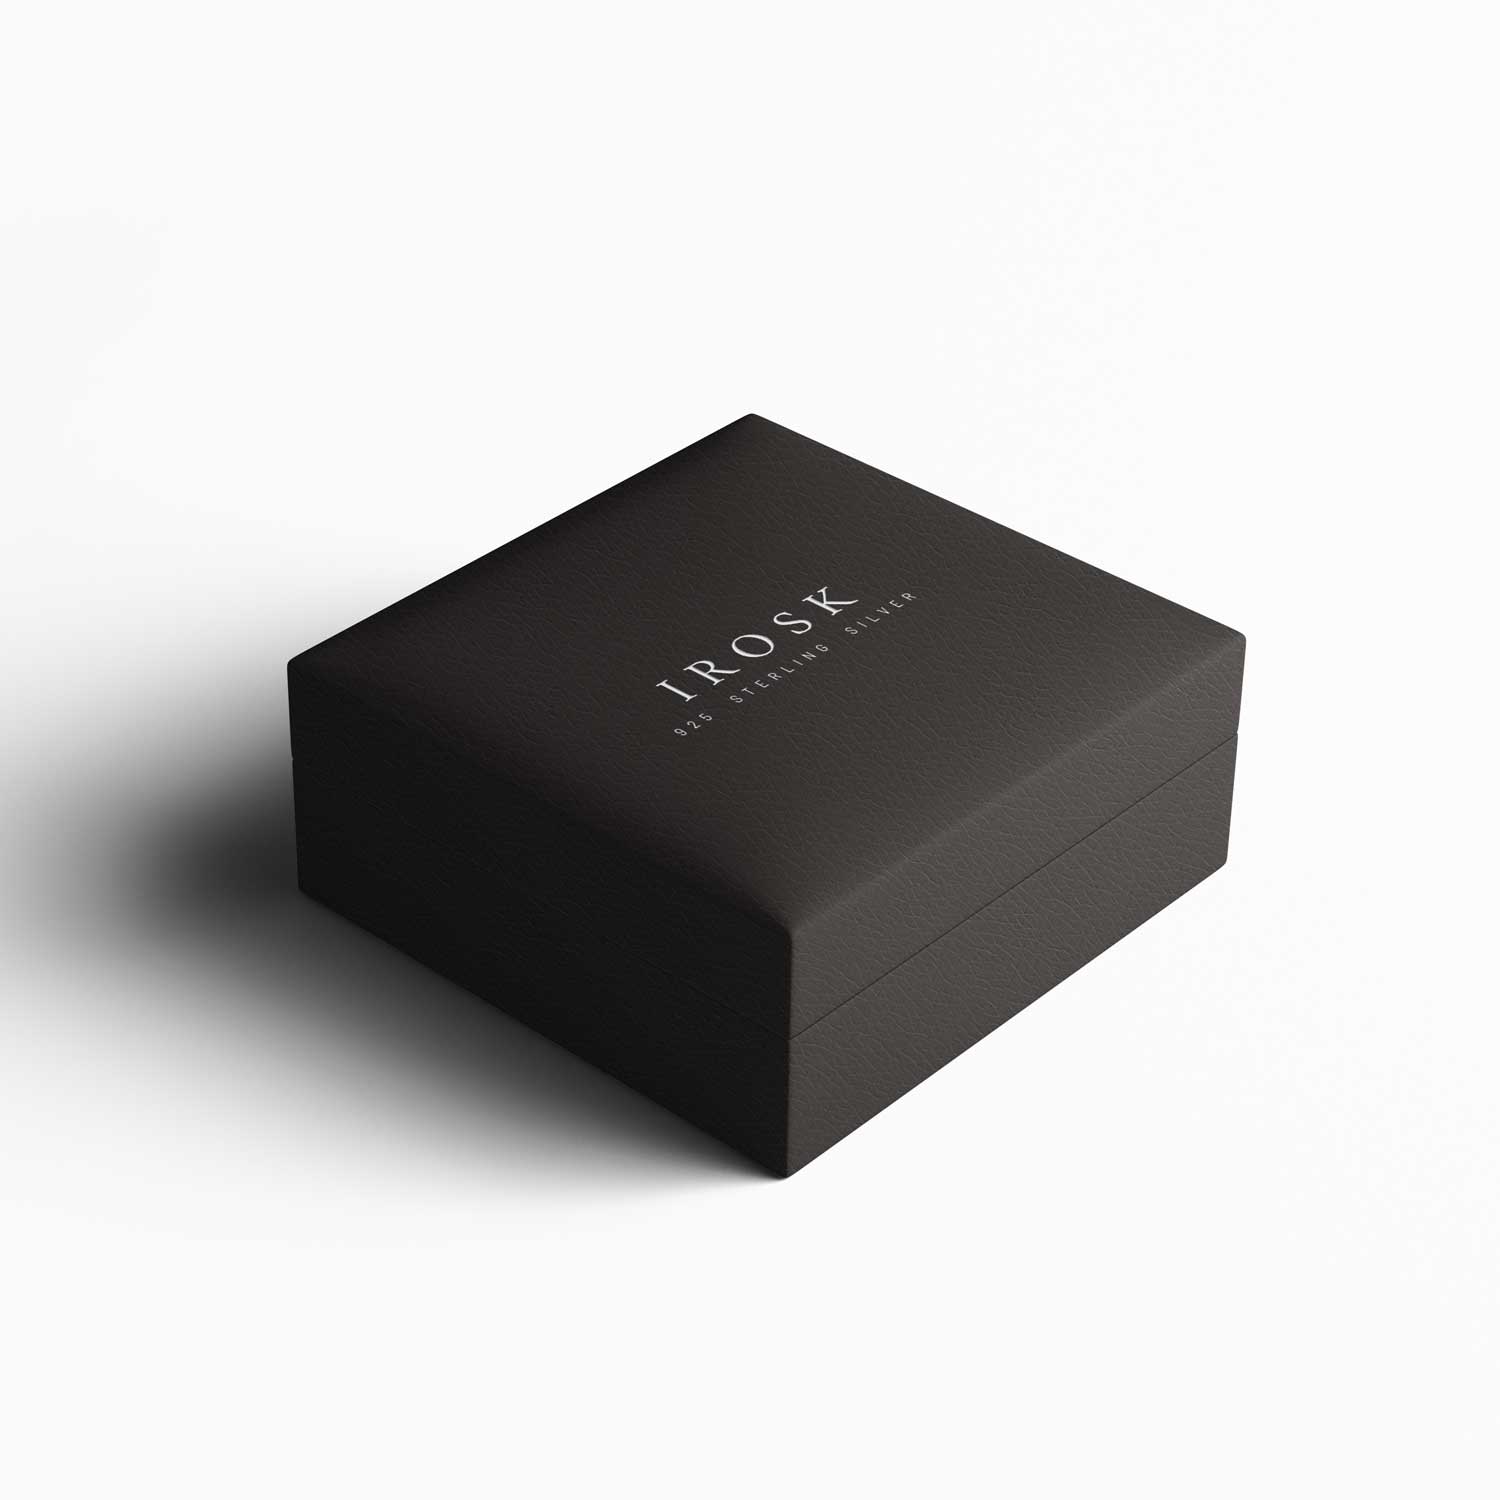 photo of irosk jewellery box which comes complimentary with the ring